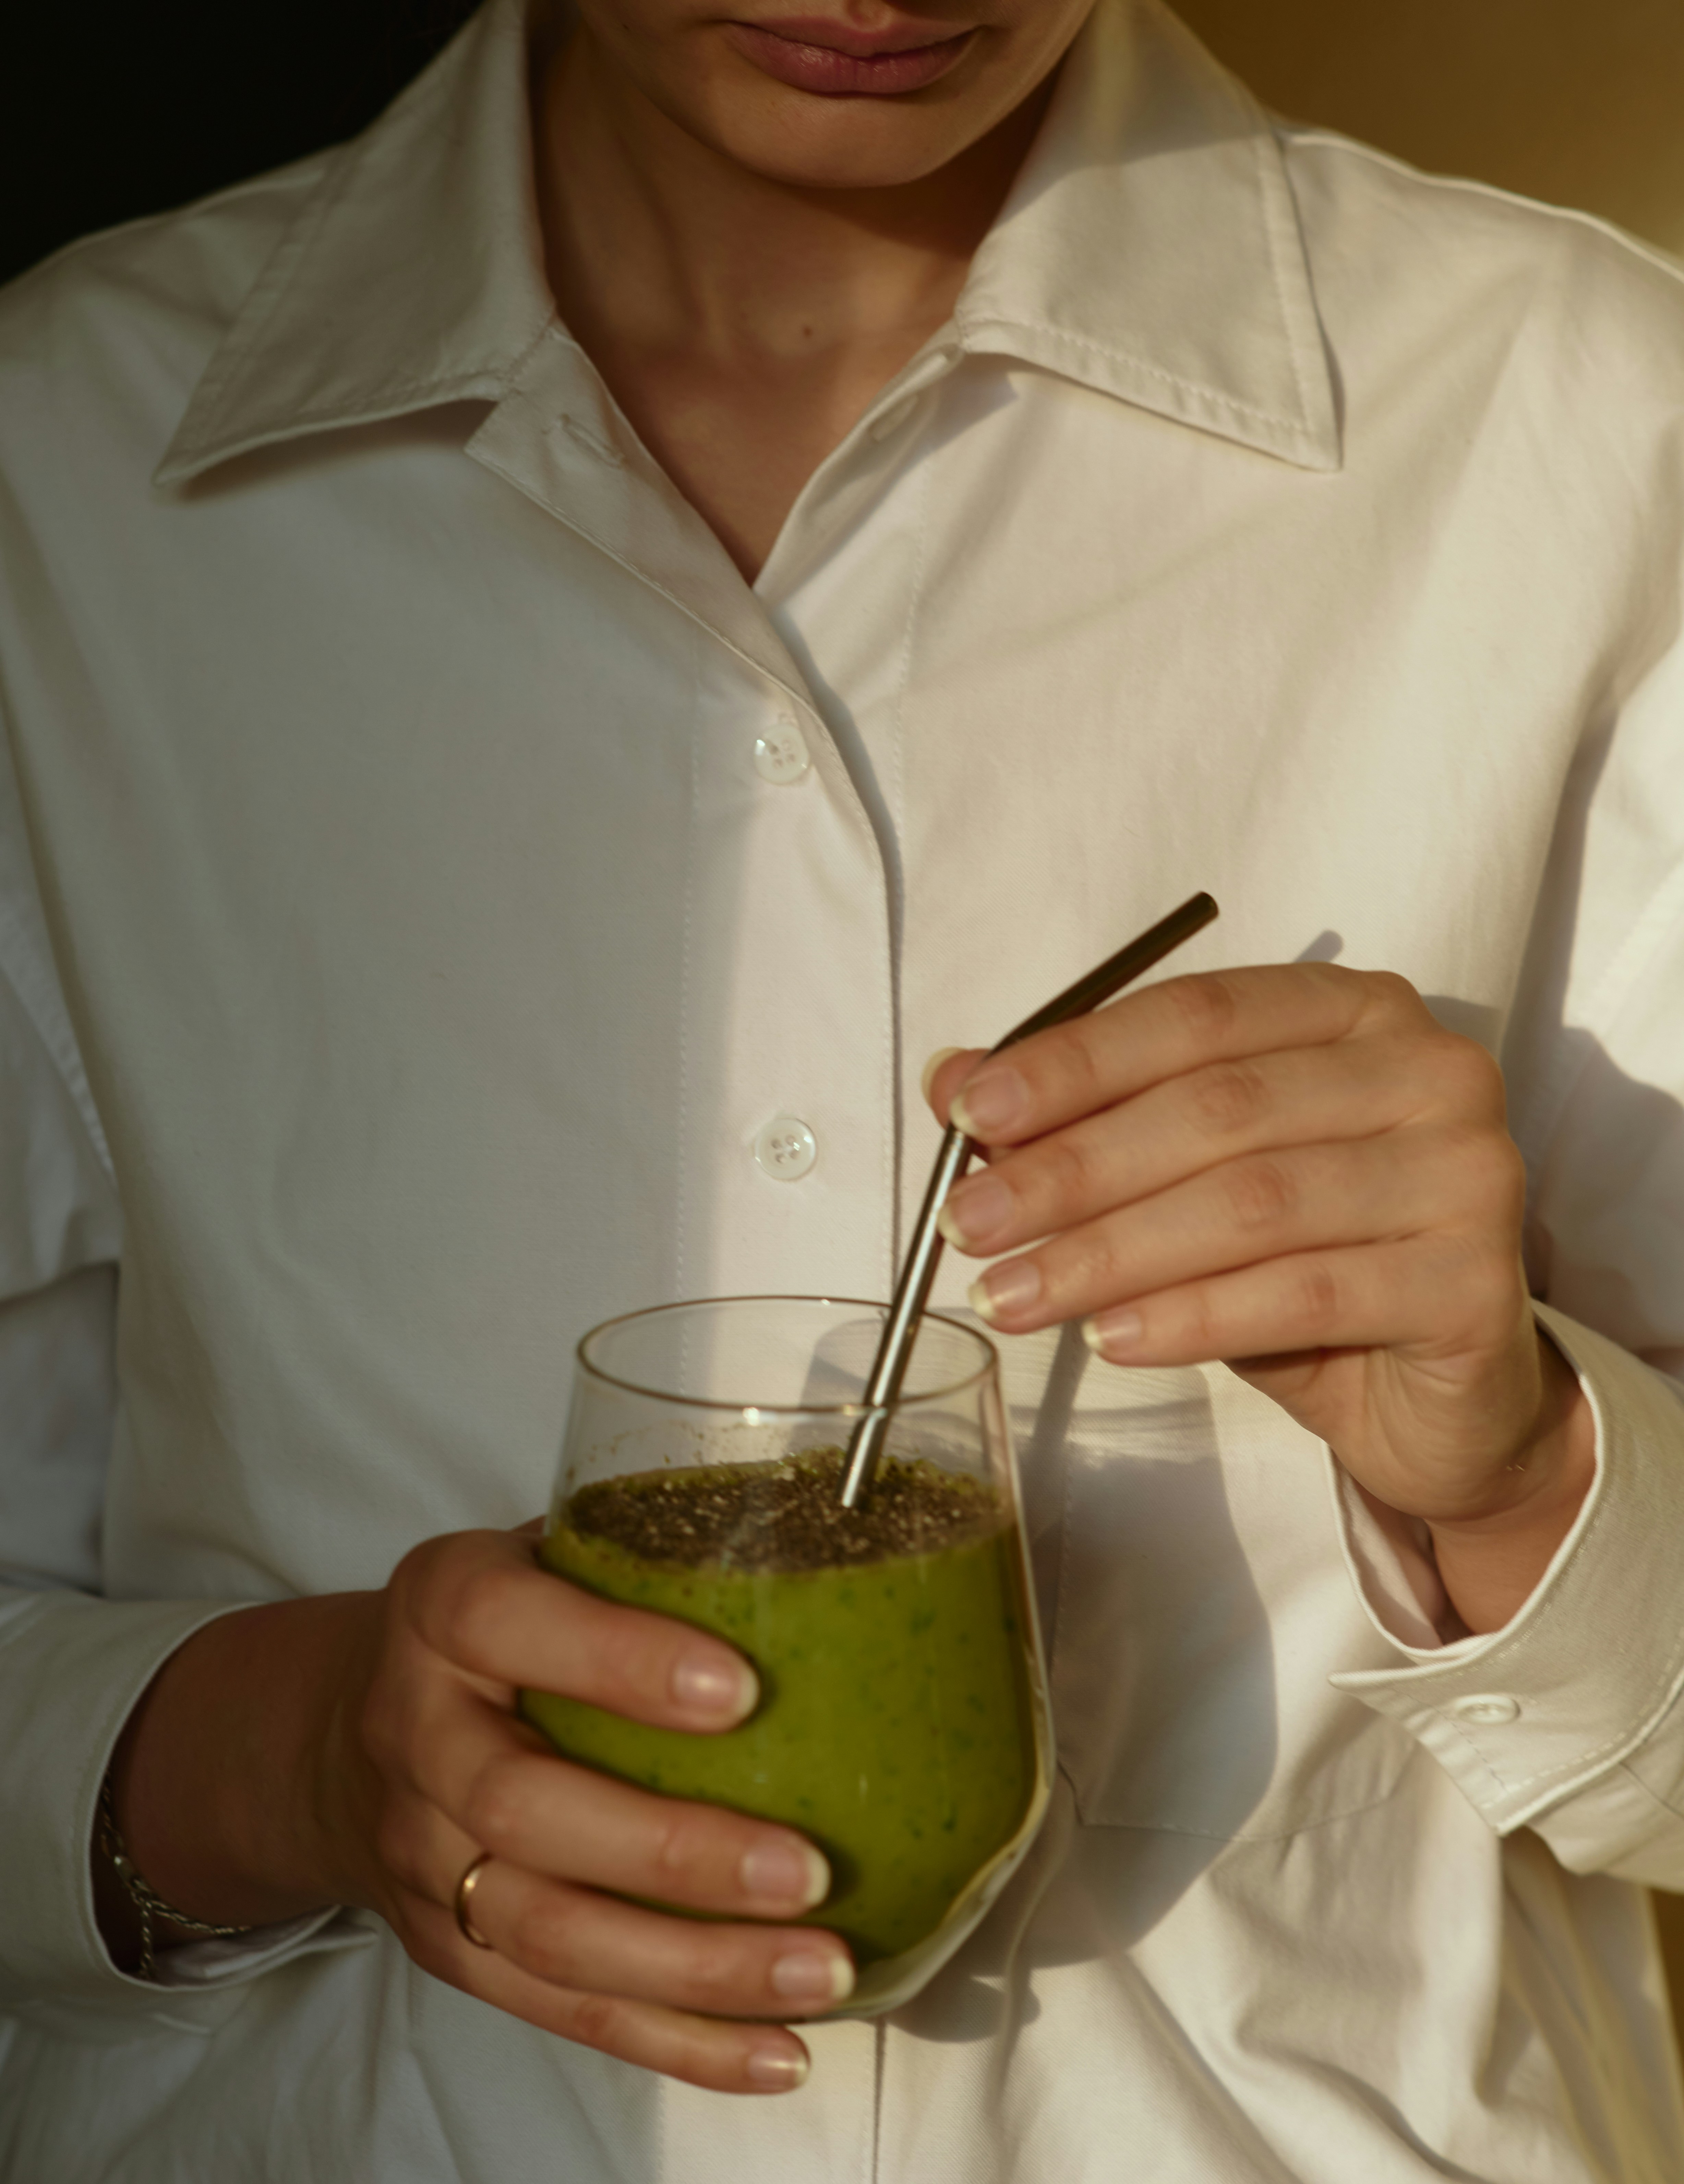 Female hands holding a glass of green smoothie with eco-friendly reusable metallic straw